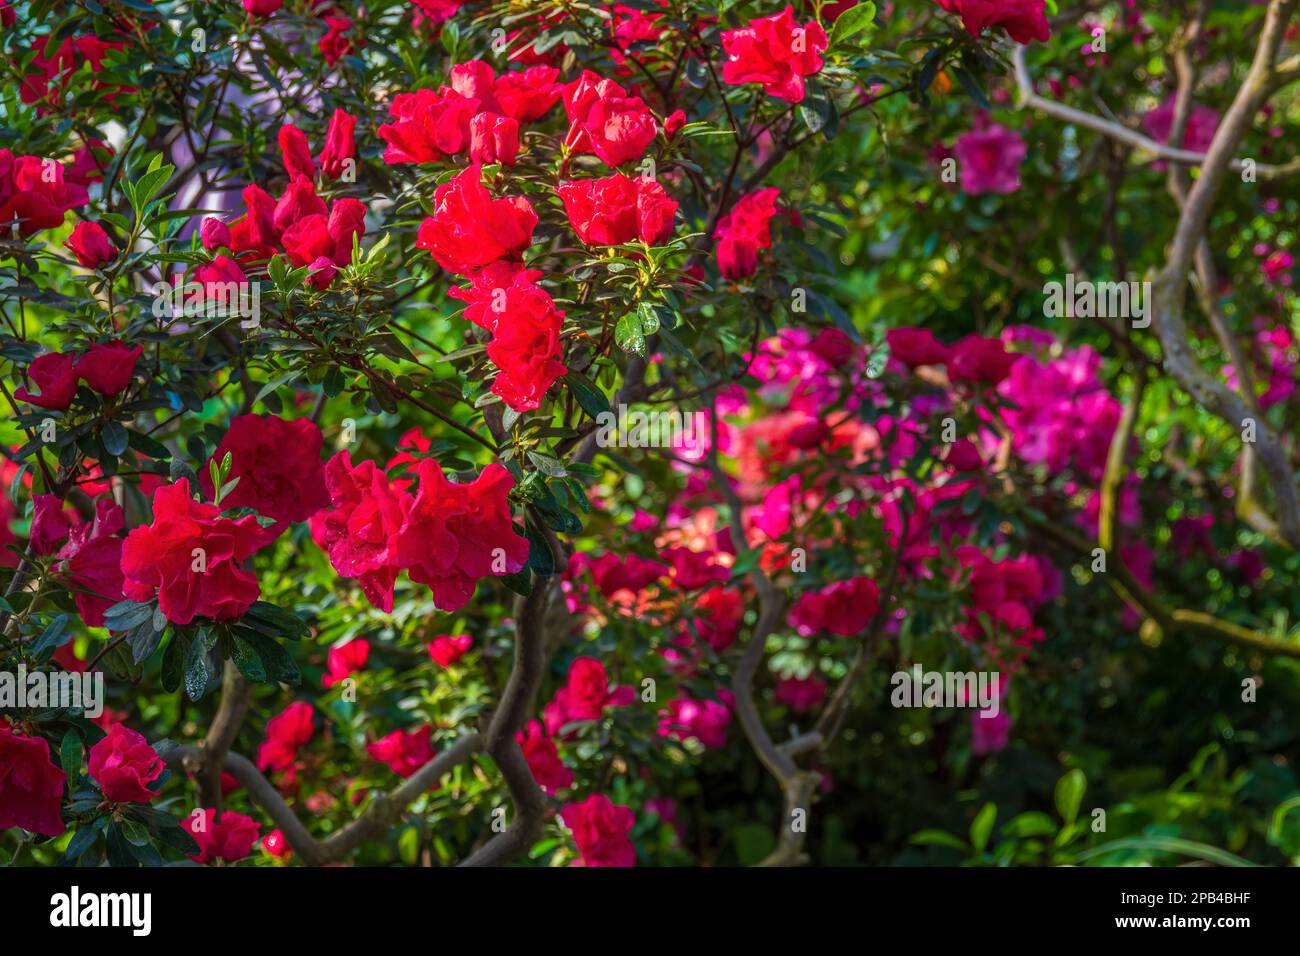 Vibrant red flowers in the garden. Selective focus on the foreground Stock Photo